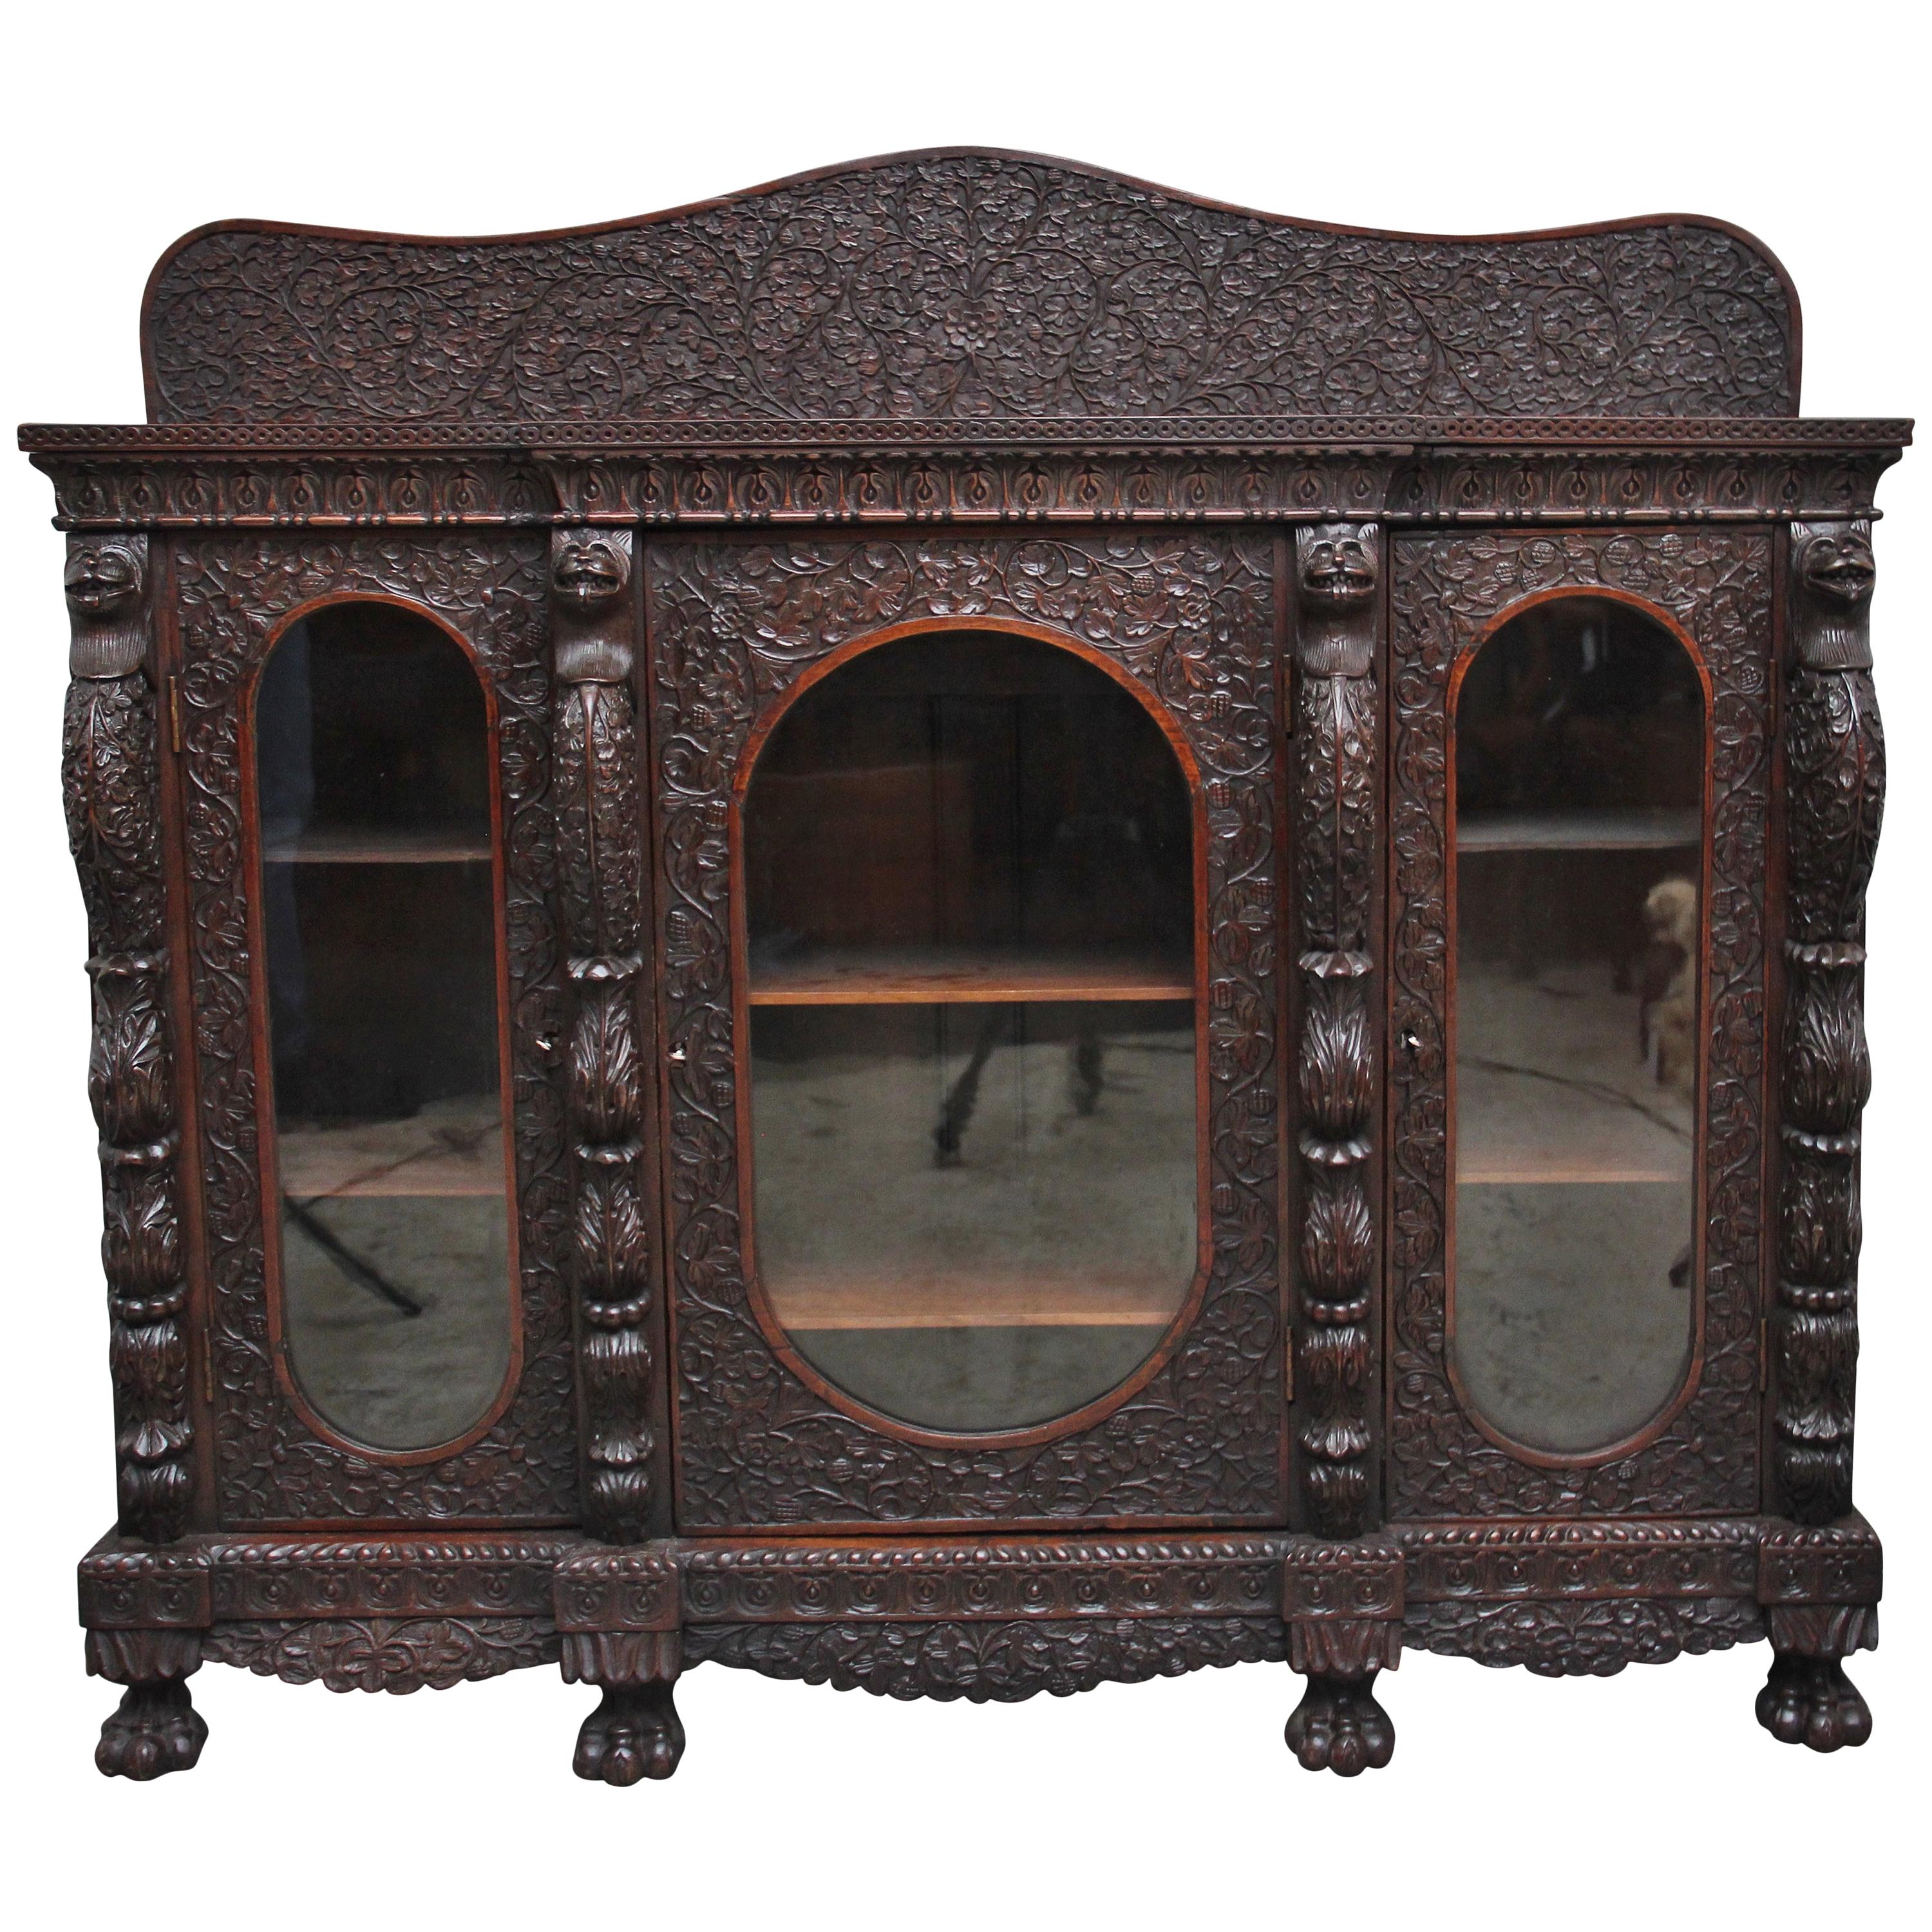 Superb Quality 19th Century Burmese Breakfront Cabinet